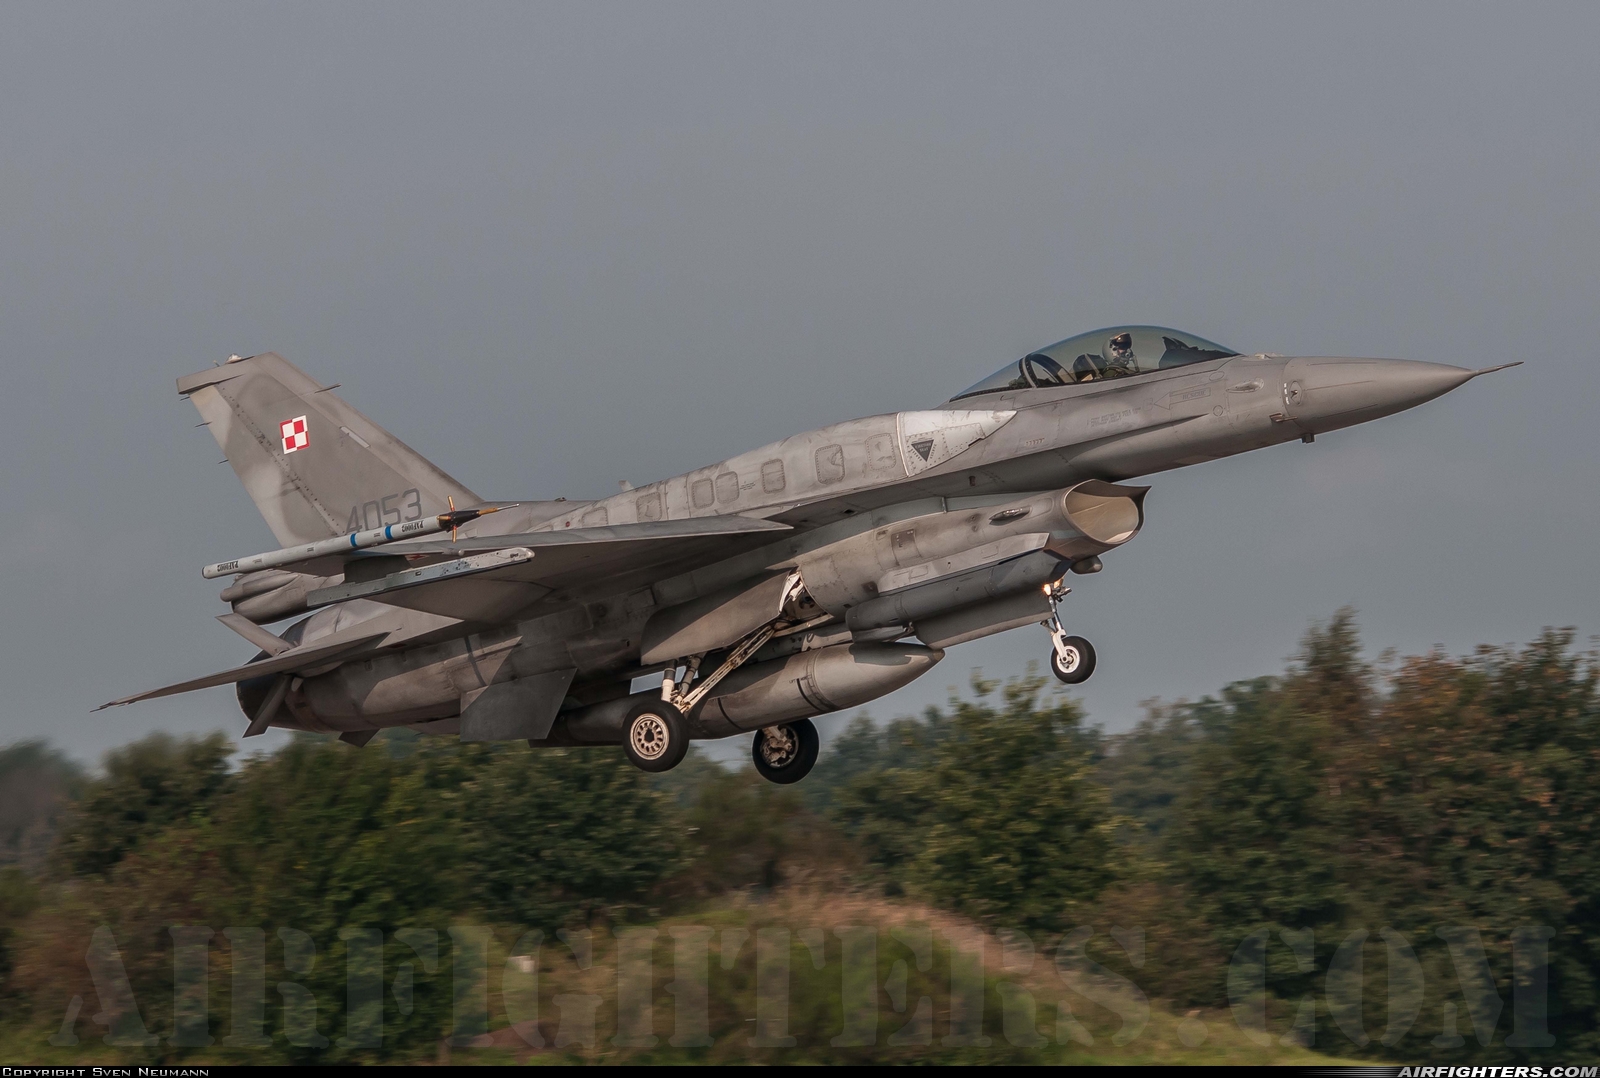 Poland - Air Force General Dynamics F-16C Fighting Falcon 4053 at Wittmundhafen (Wittmund) (ETNT), Germany